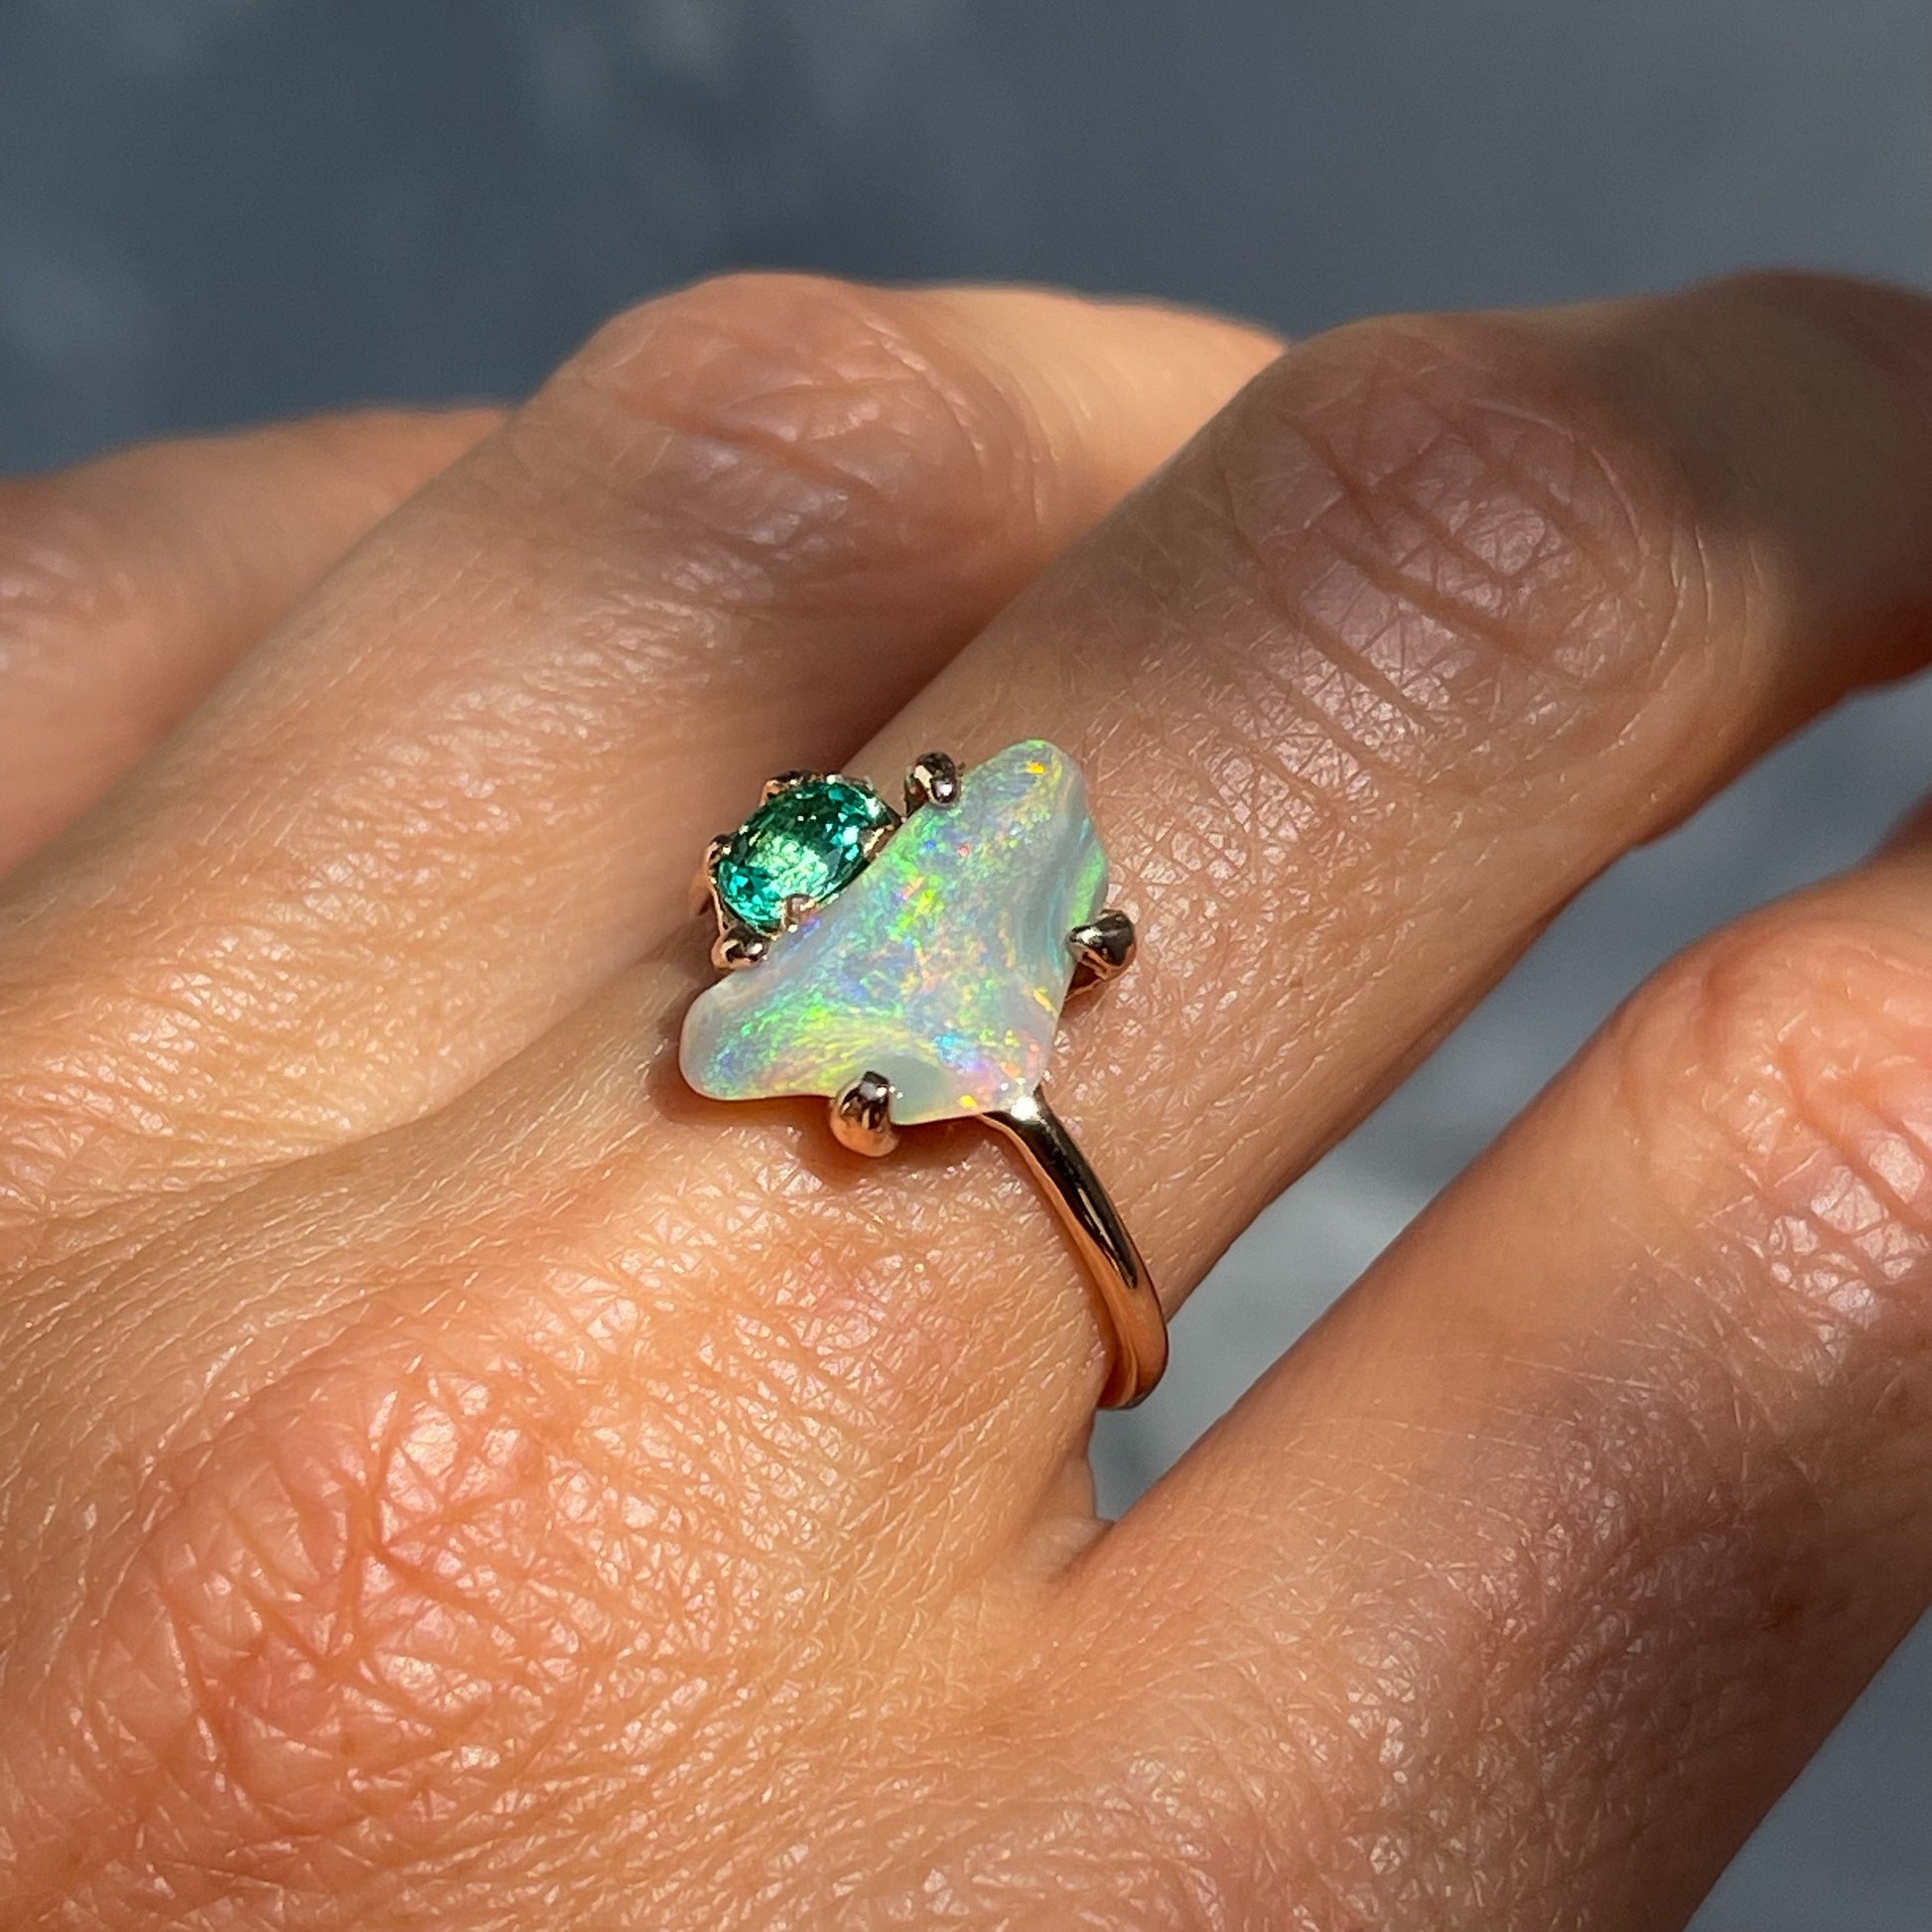 Angled view of an Opal and Emerald Ring by NIXIN Jewelry modeled on the hand. The emerald and Black Opal stone are set in a handmade rose gold ring.